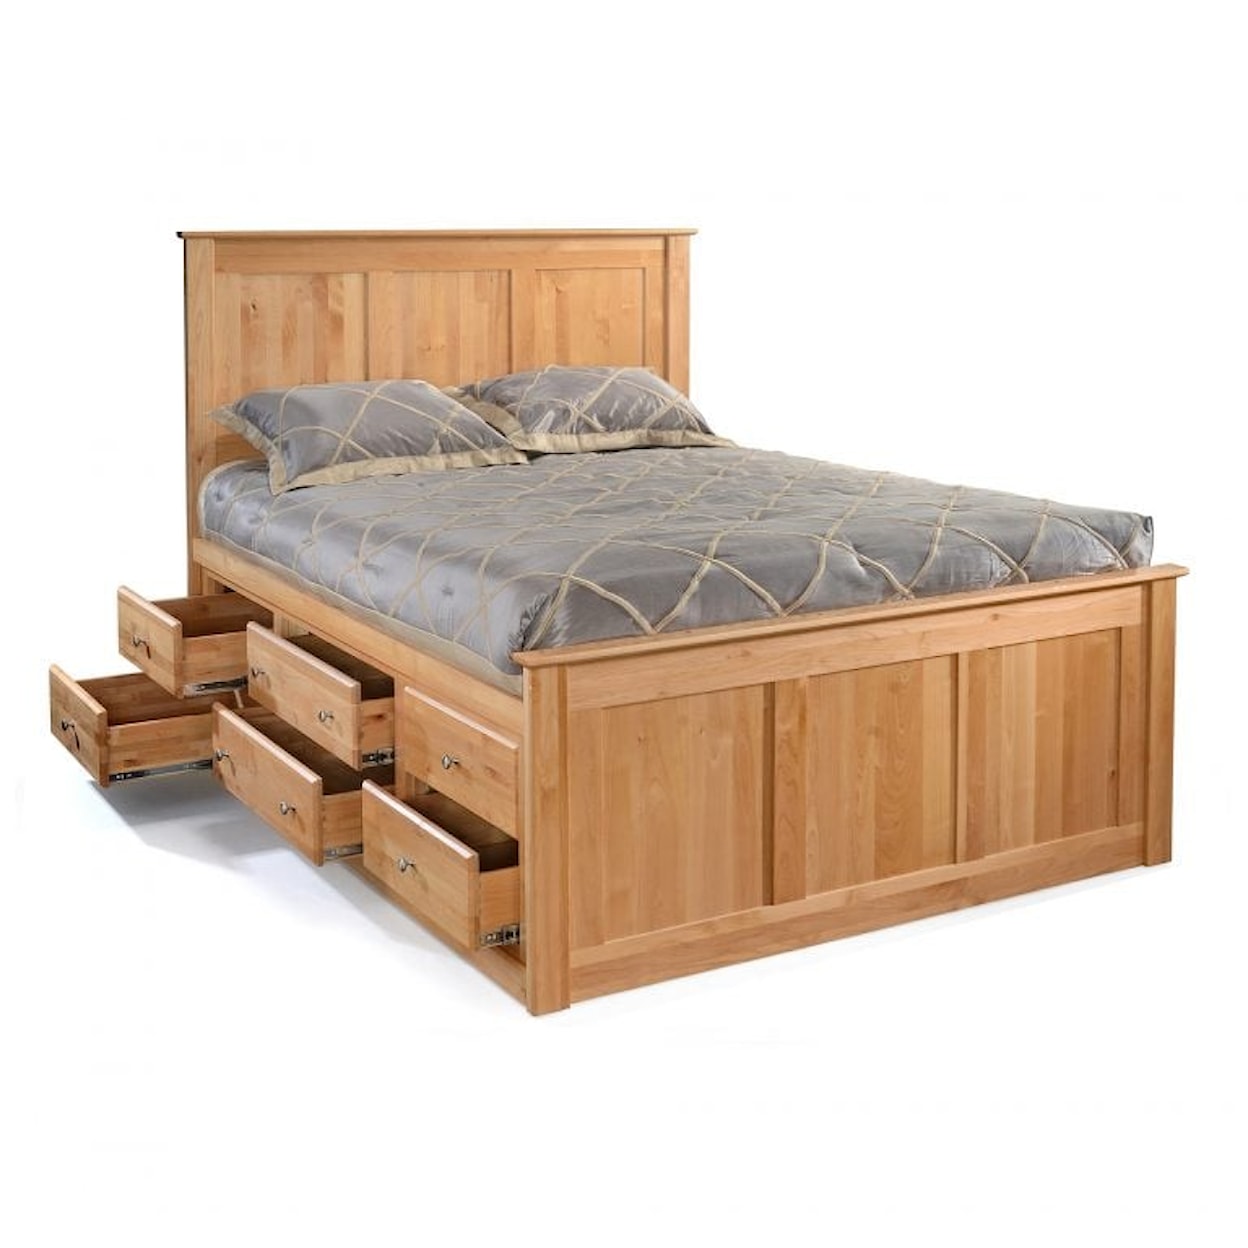 Archbold Furniture Chest Bed Full 9-Drawer Chest Bed